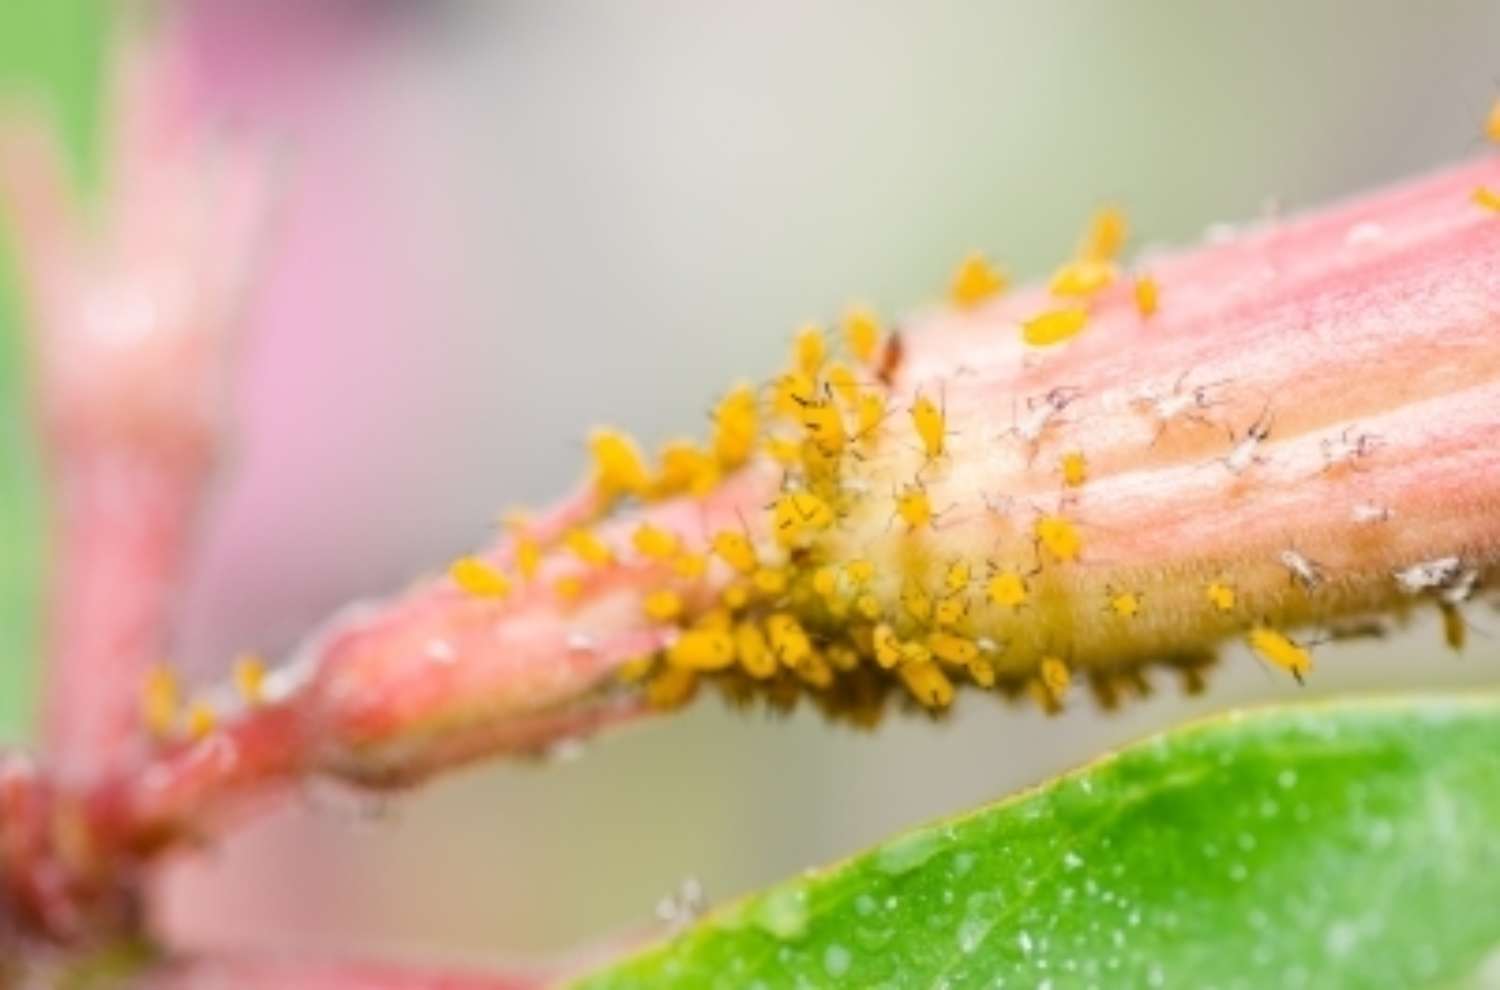 How to treat aphids on indoor plants Image courtesy of Sweet Crisis at Free Digital Photos net